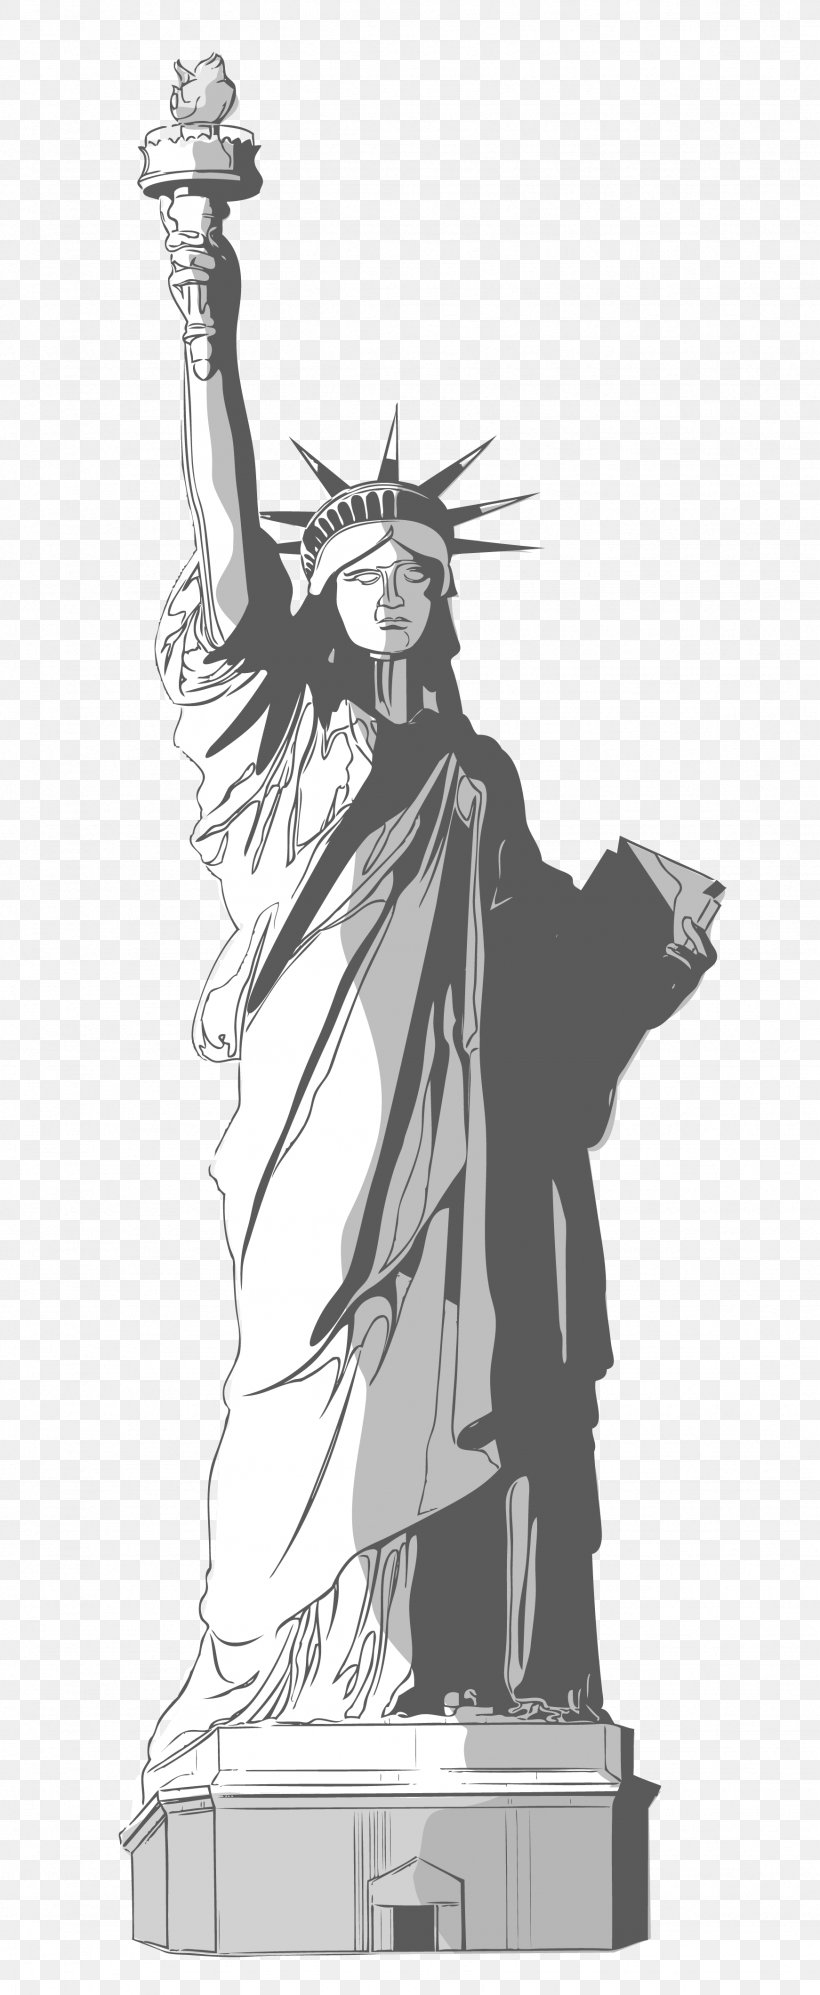 Statue Of Liberty Clip Art, PNG, 1742x4239px, Statue Of.